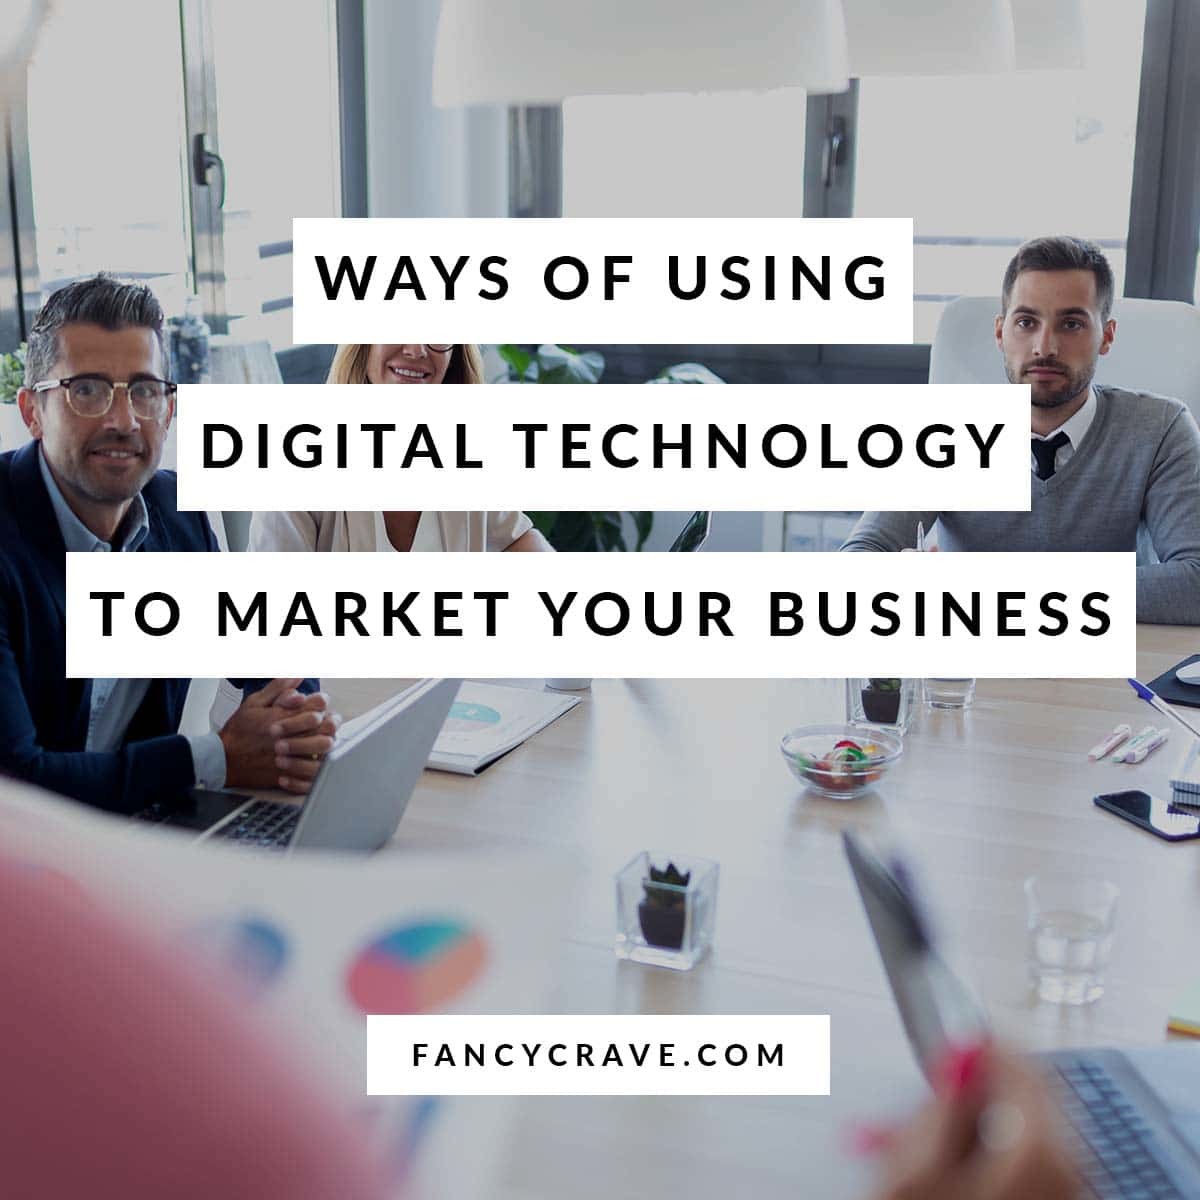 Ways of Using Digital Technology to Market Your Business